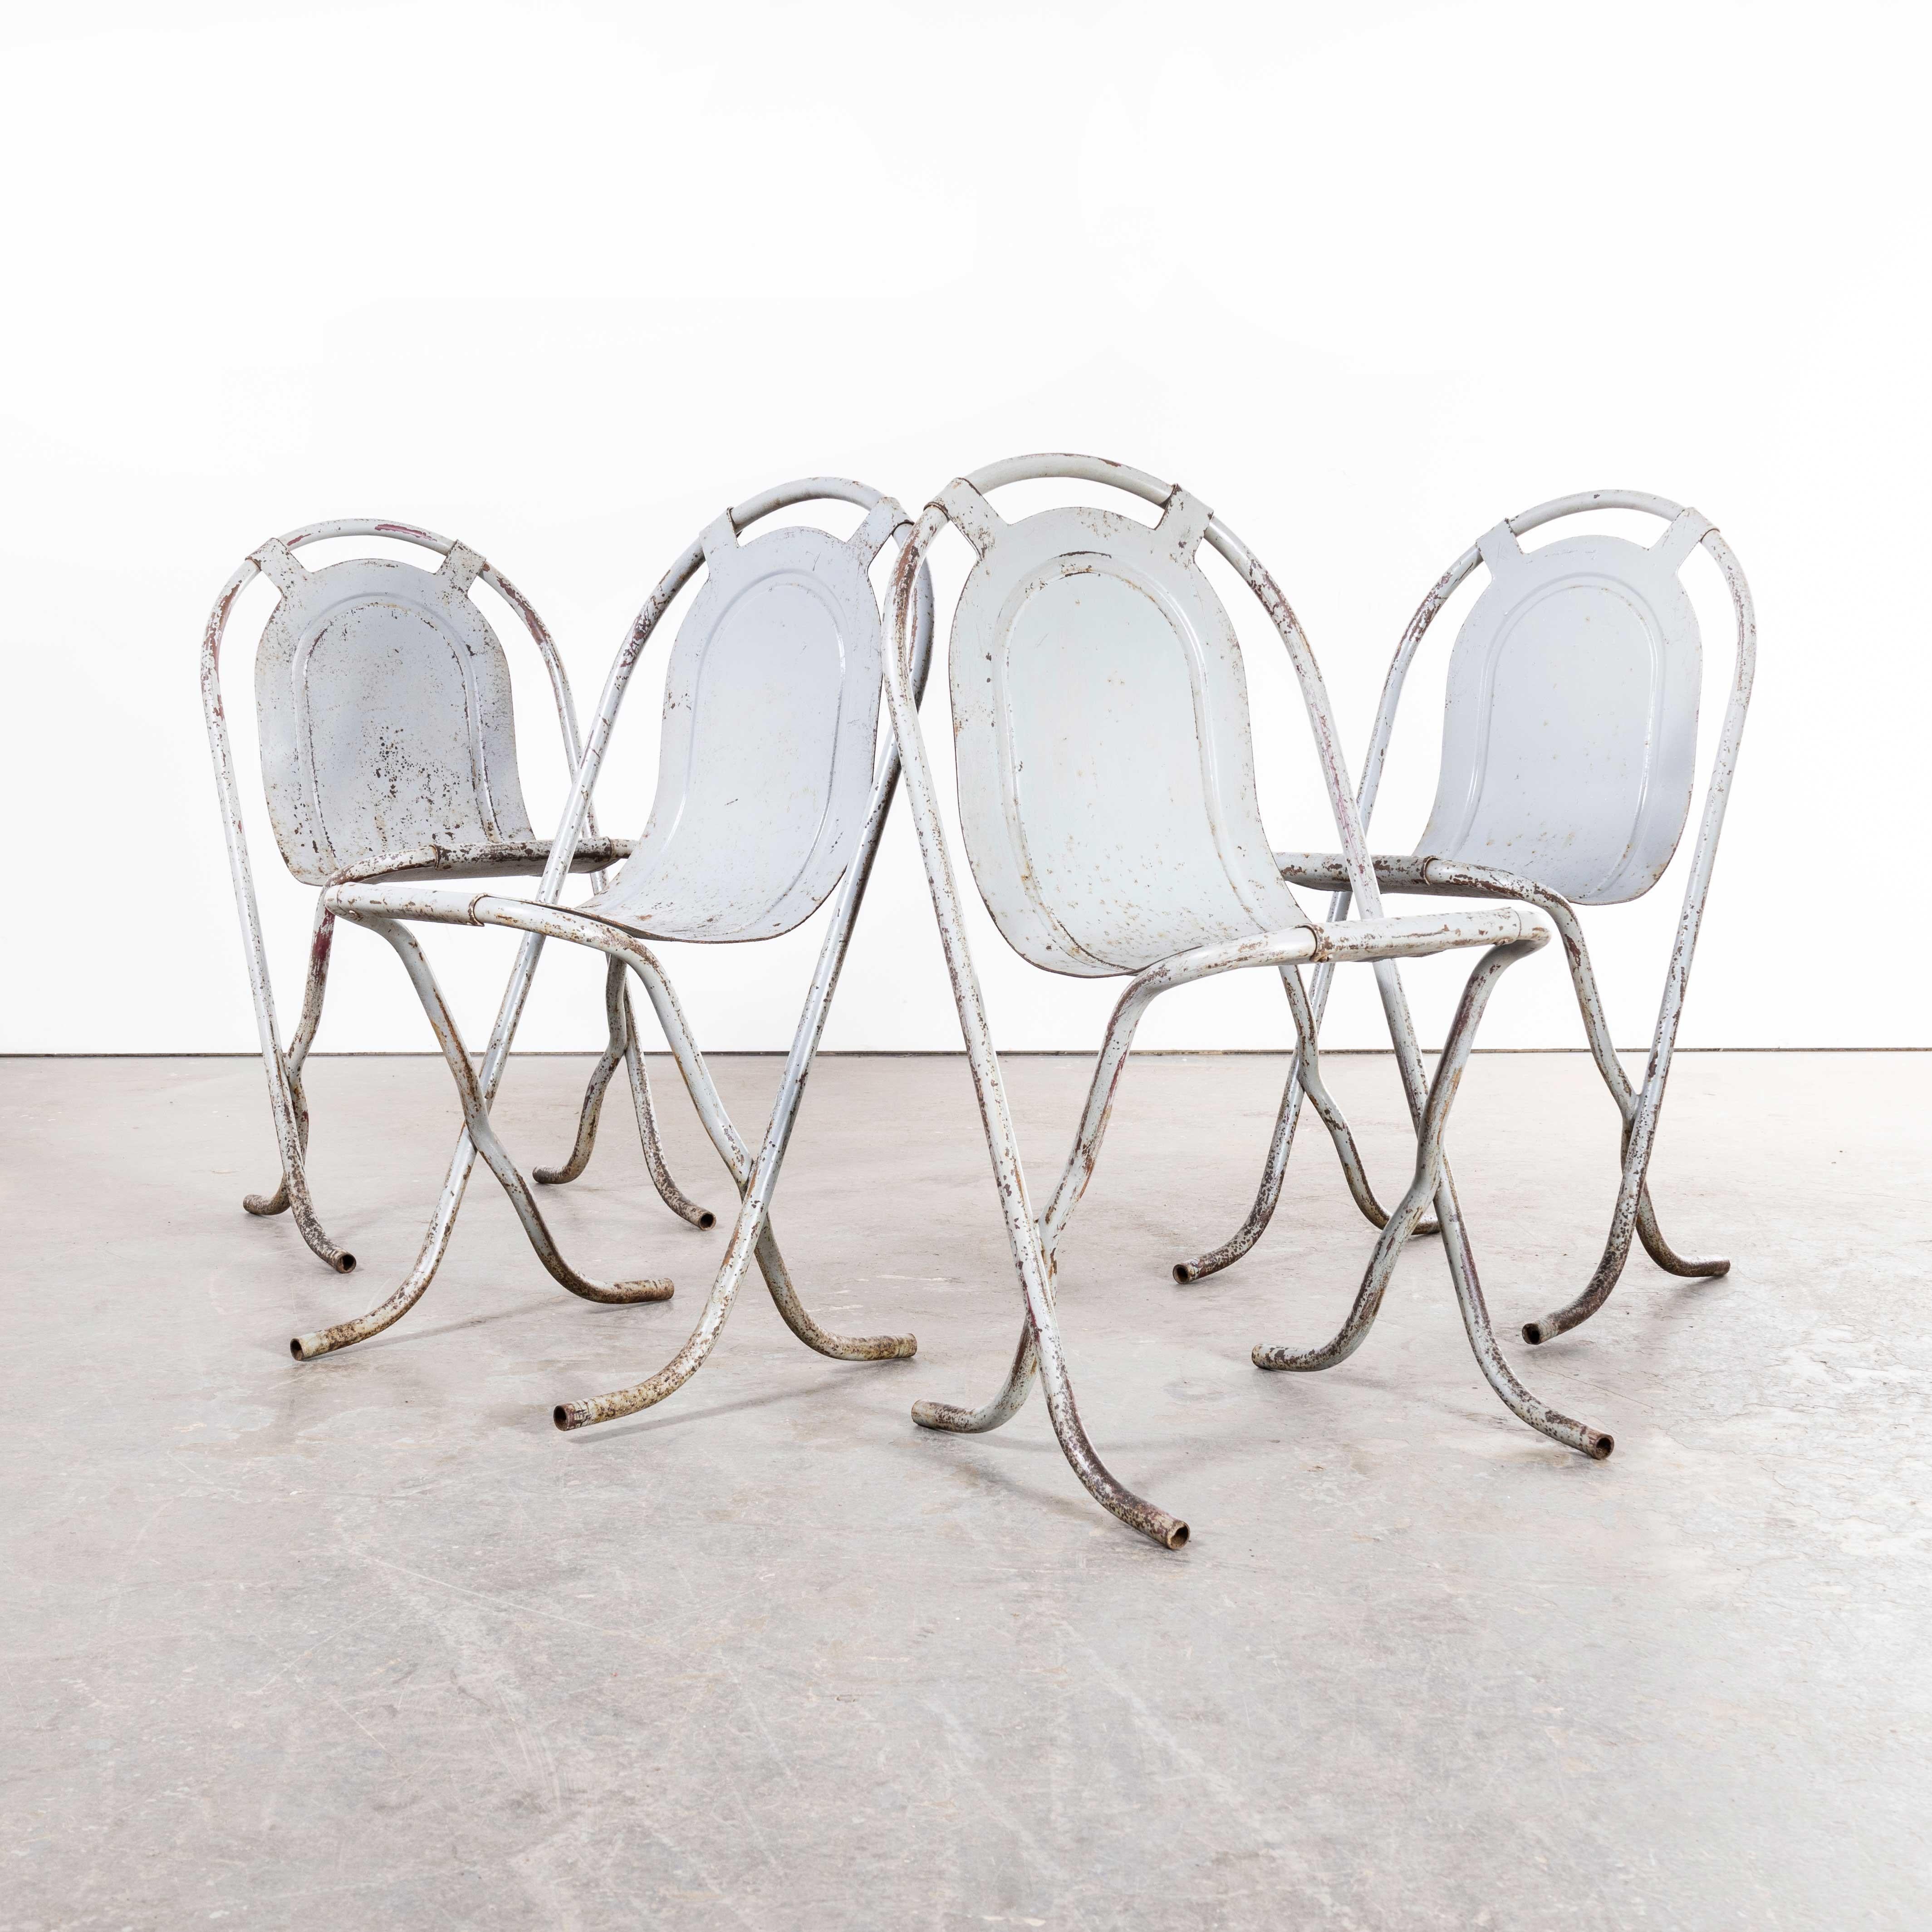 1940s Original British Stak a Bye Chairs, Grey, Set of Four For Sale 4